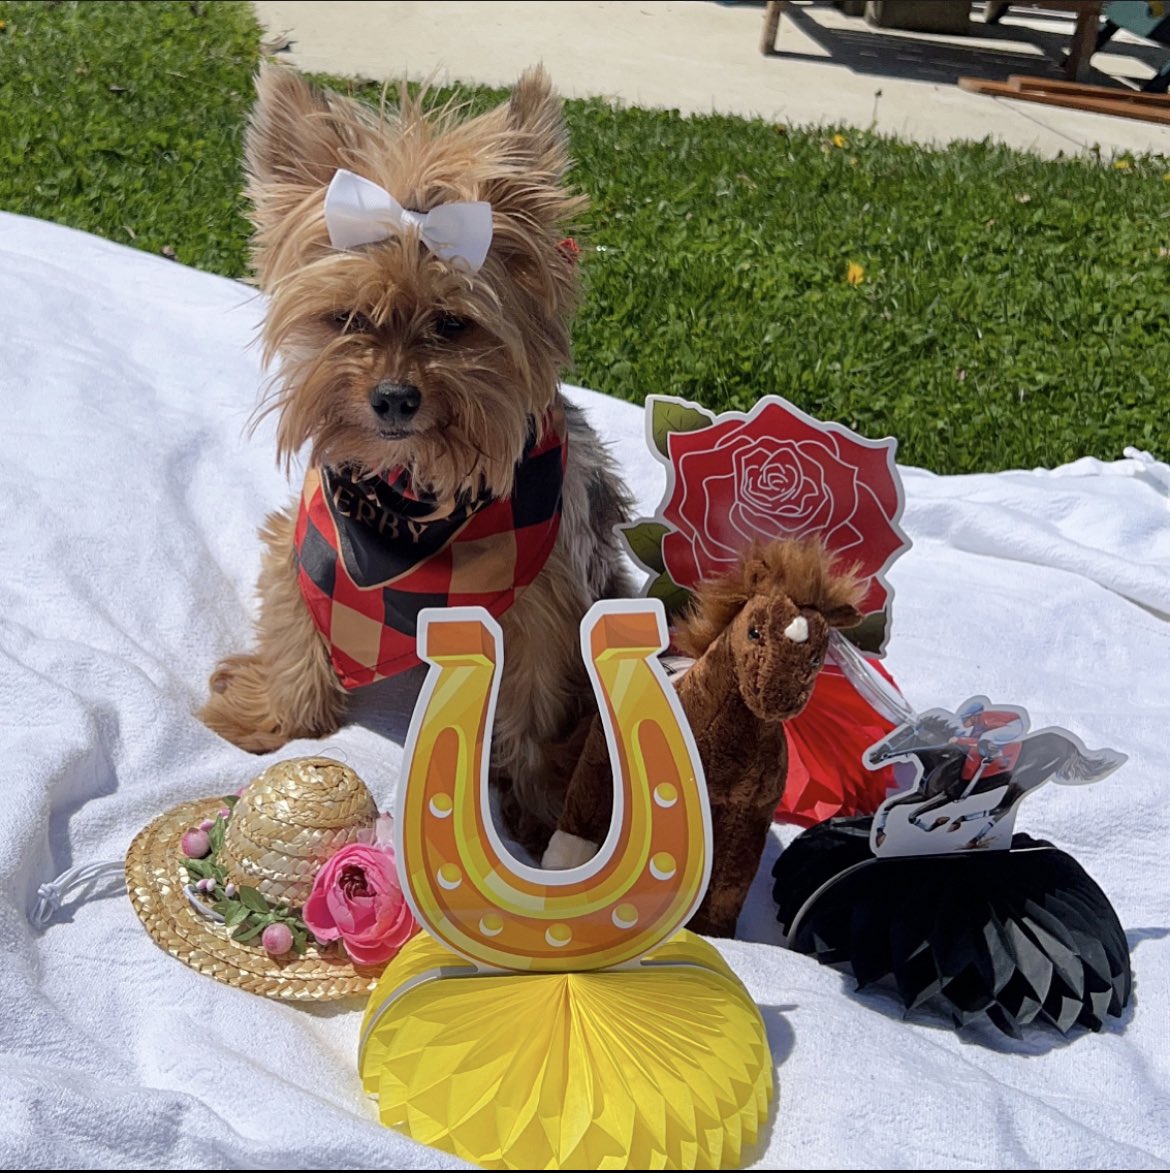 Kentucky Derby Day 🐎 Who is your favorite? #KentuckyDerby #KentuckyDerby149 #KentuckyDerby2023 #ChurchillDowns #cute #love #DogsofTwittter #DogsOnTwitter #Dogsarefamily